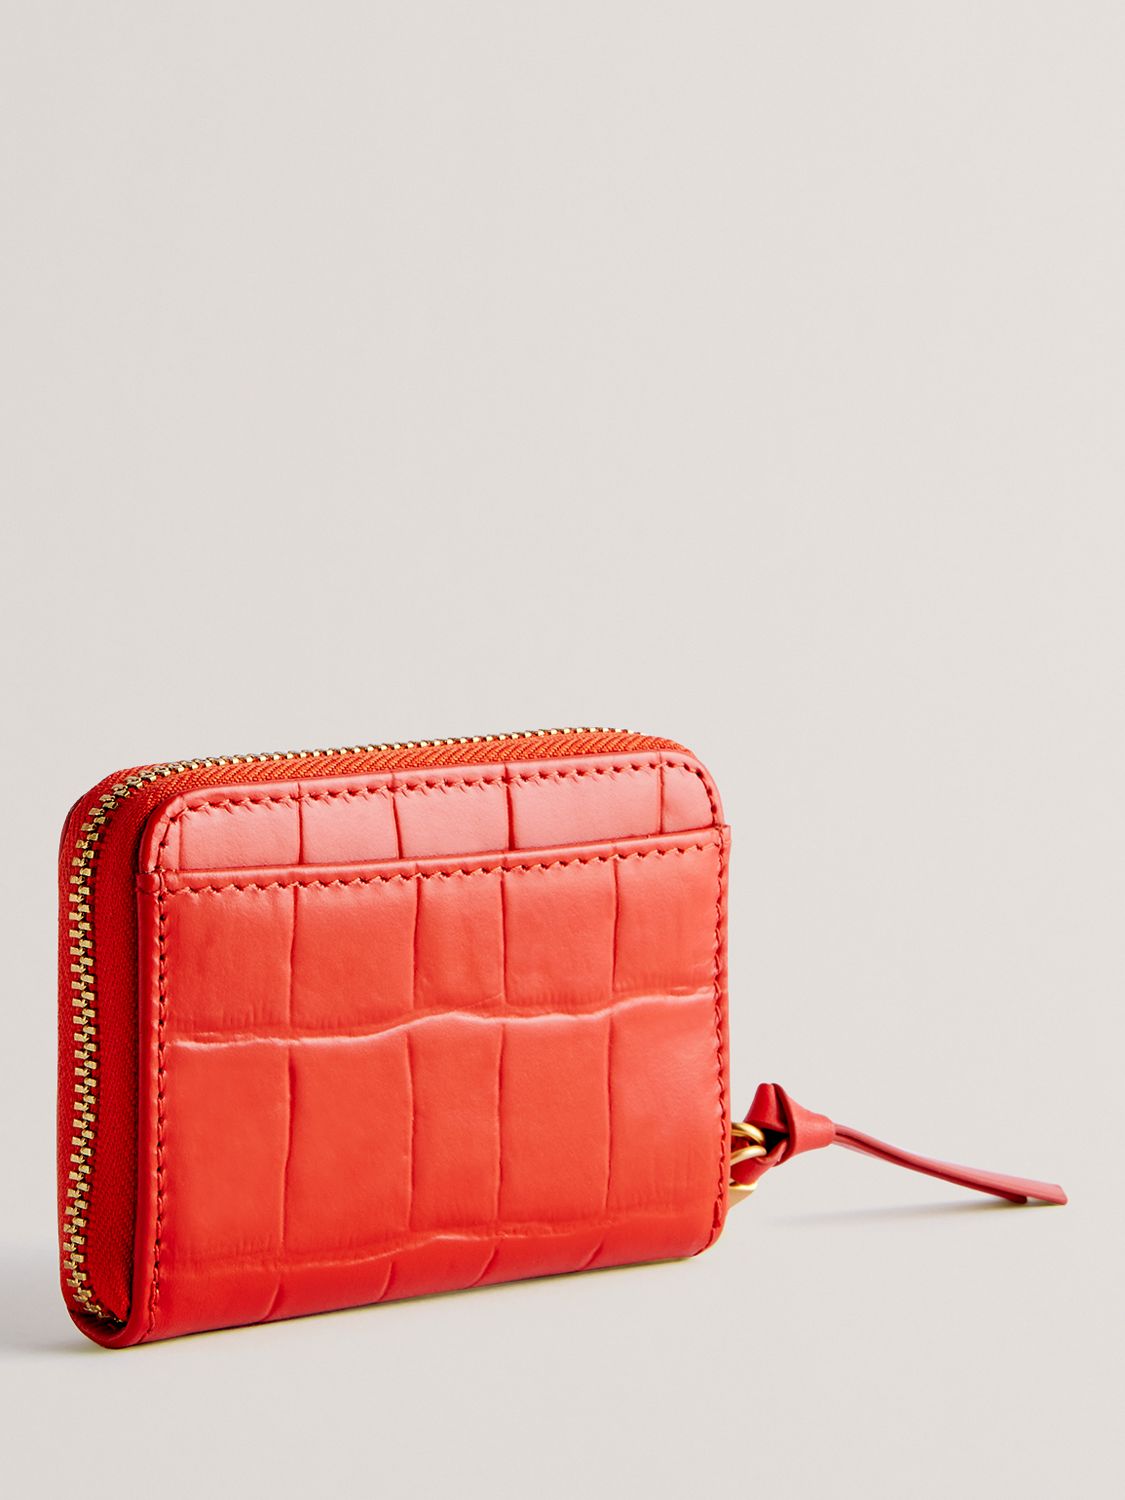 Ted Baker Wesmin Small Croc Effect Leather Purse, Red, One Size